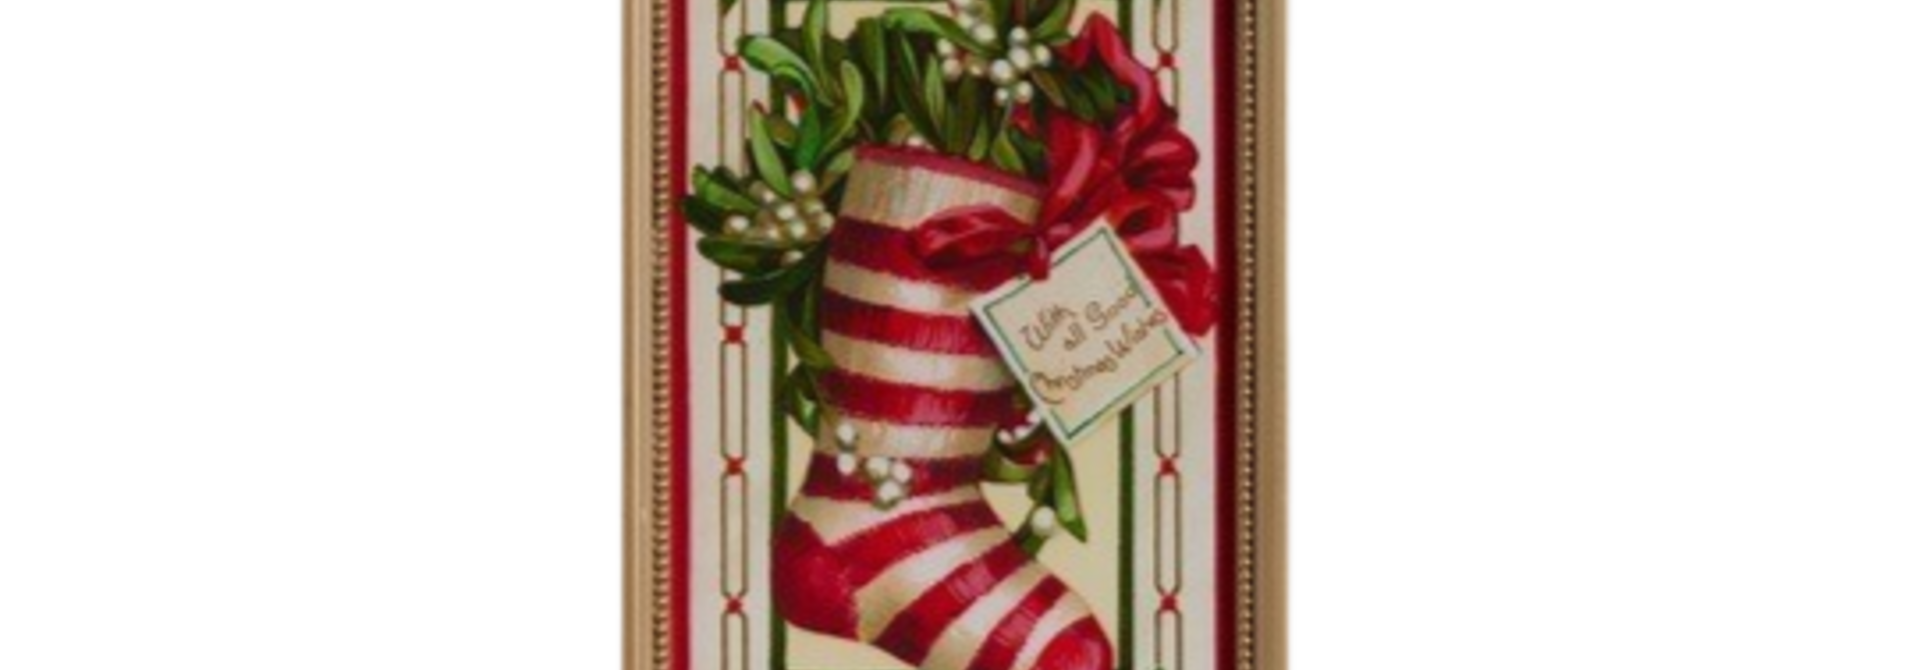 Stocking | The Holiday Art Collection, Multi - 12 Inch x 18 Inch